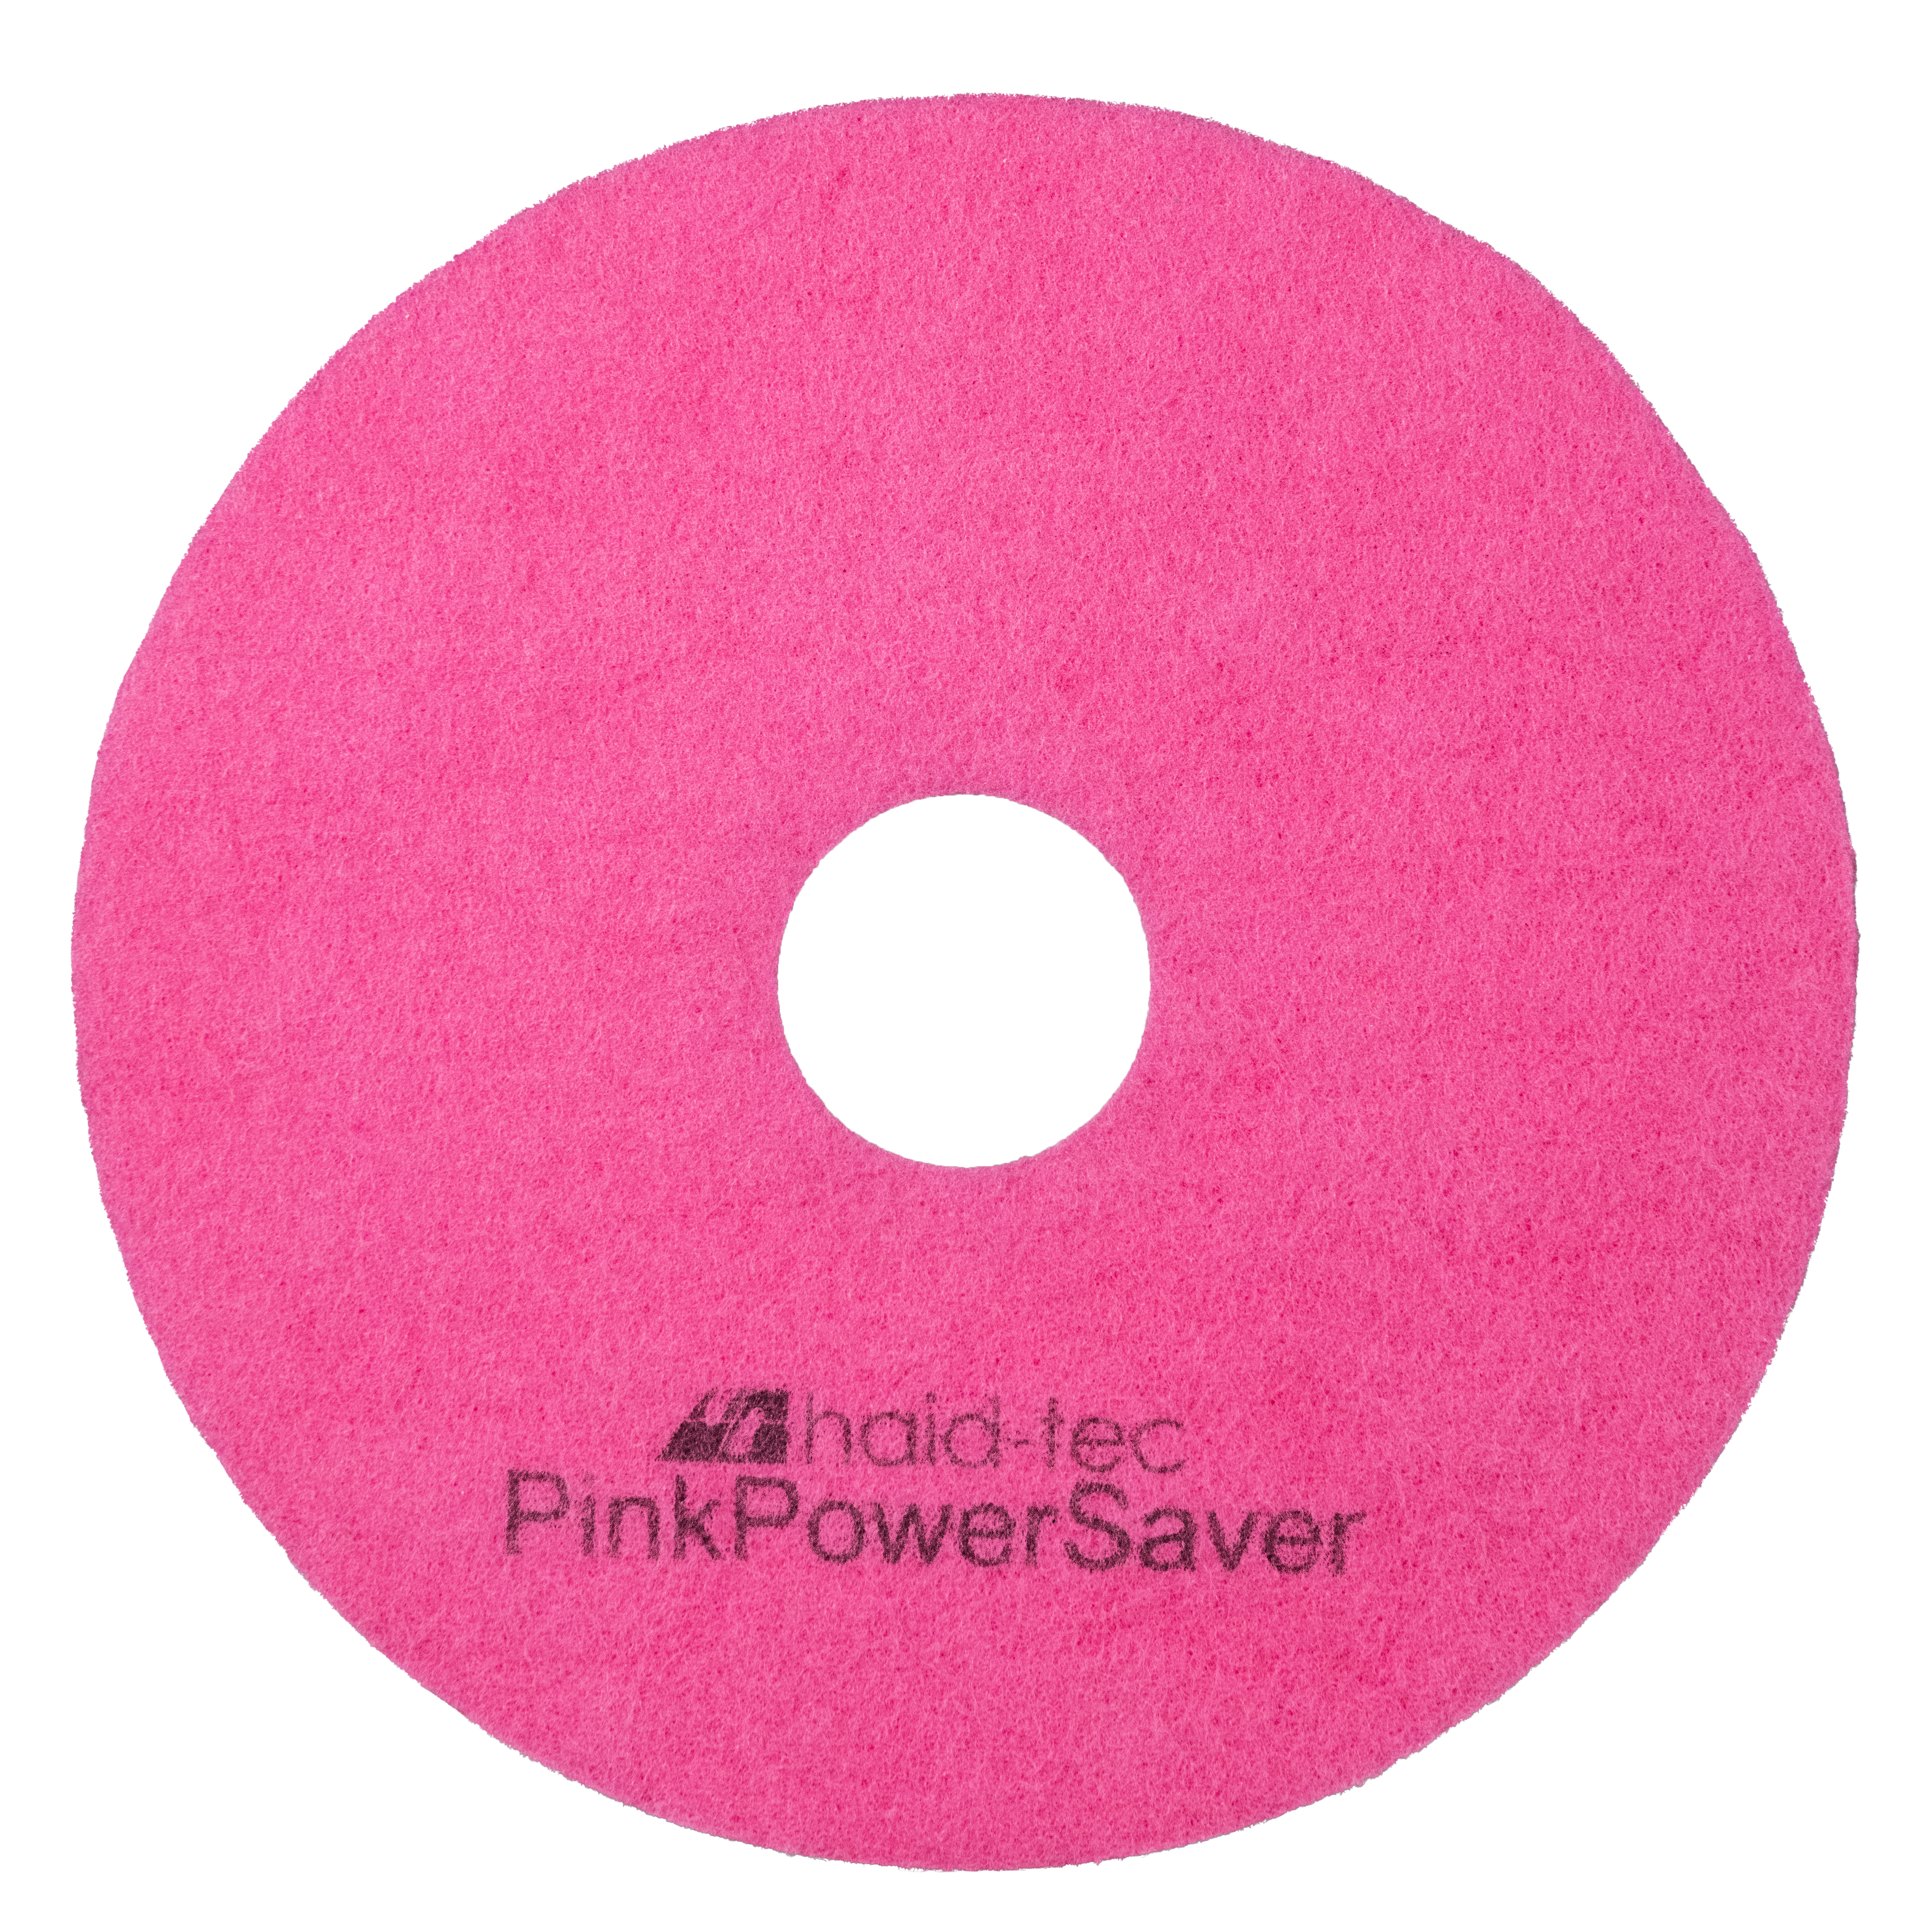 PinkPowerSaver Pad 15inch/381mm for scrubber dryer - melamine pad for intensive and maintenance cleaning